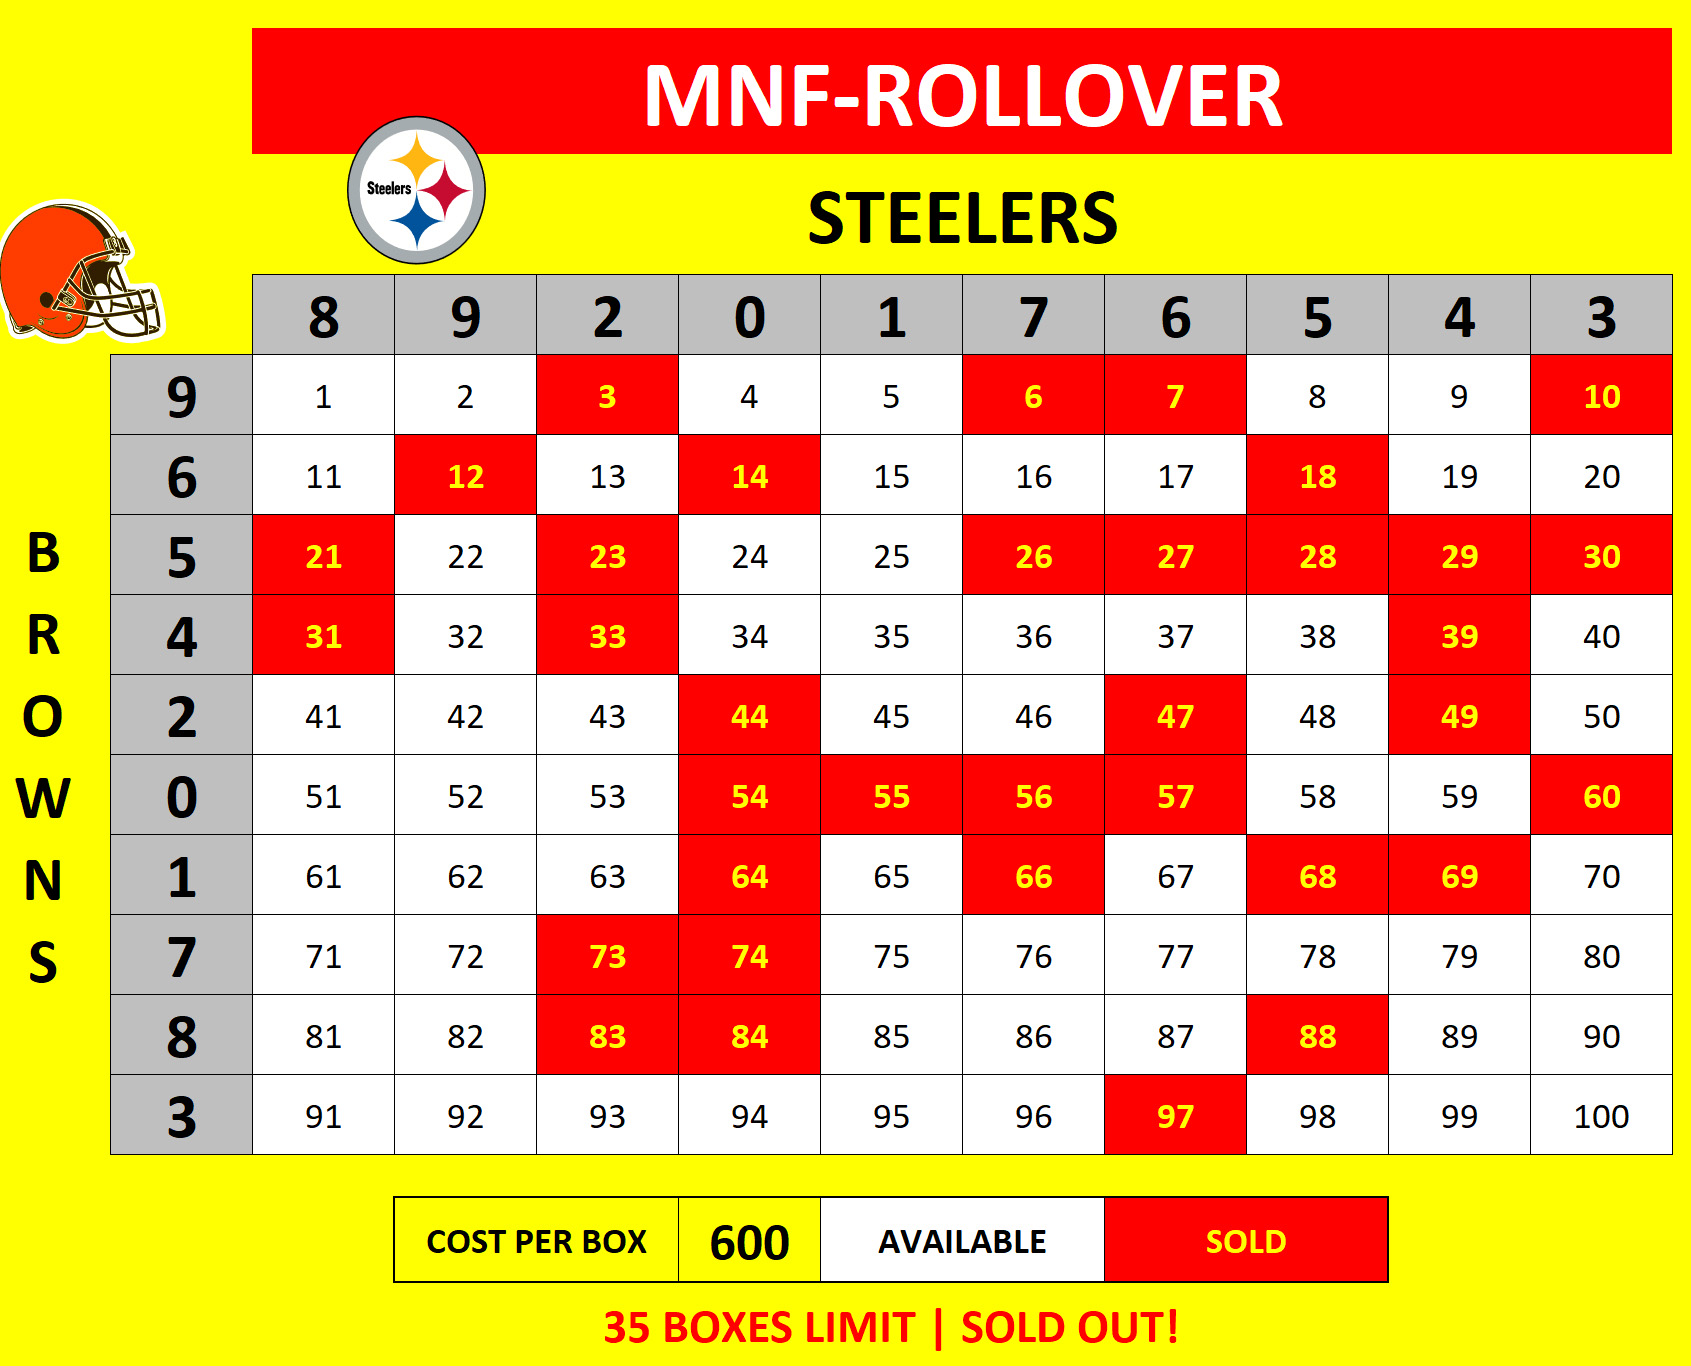 MNF-Rollover-B Browns at Steelers